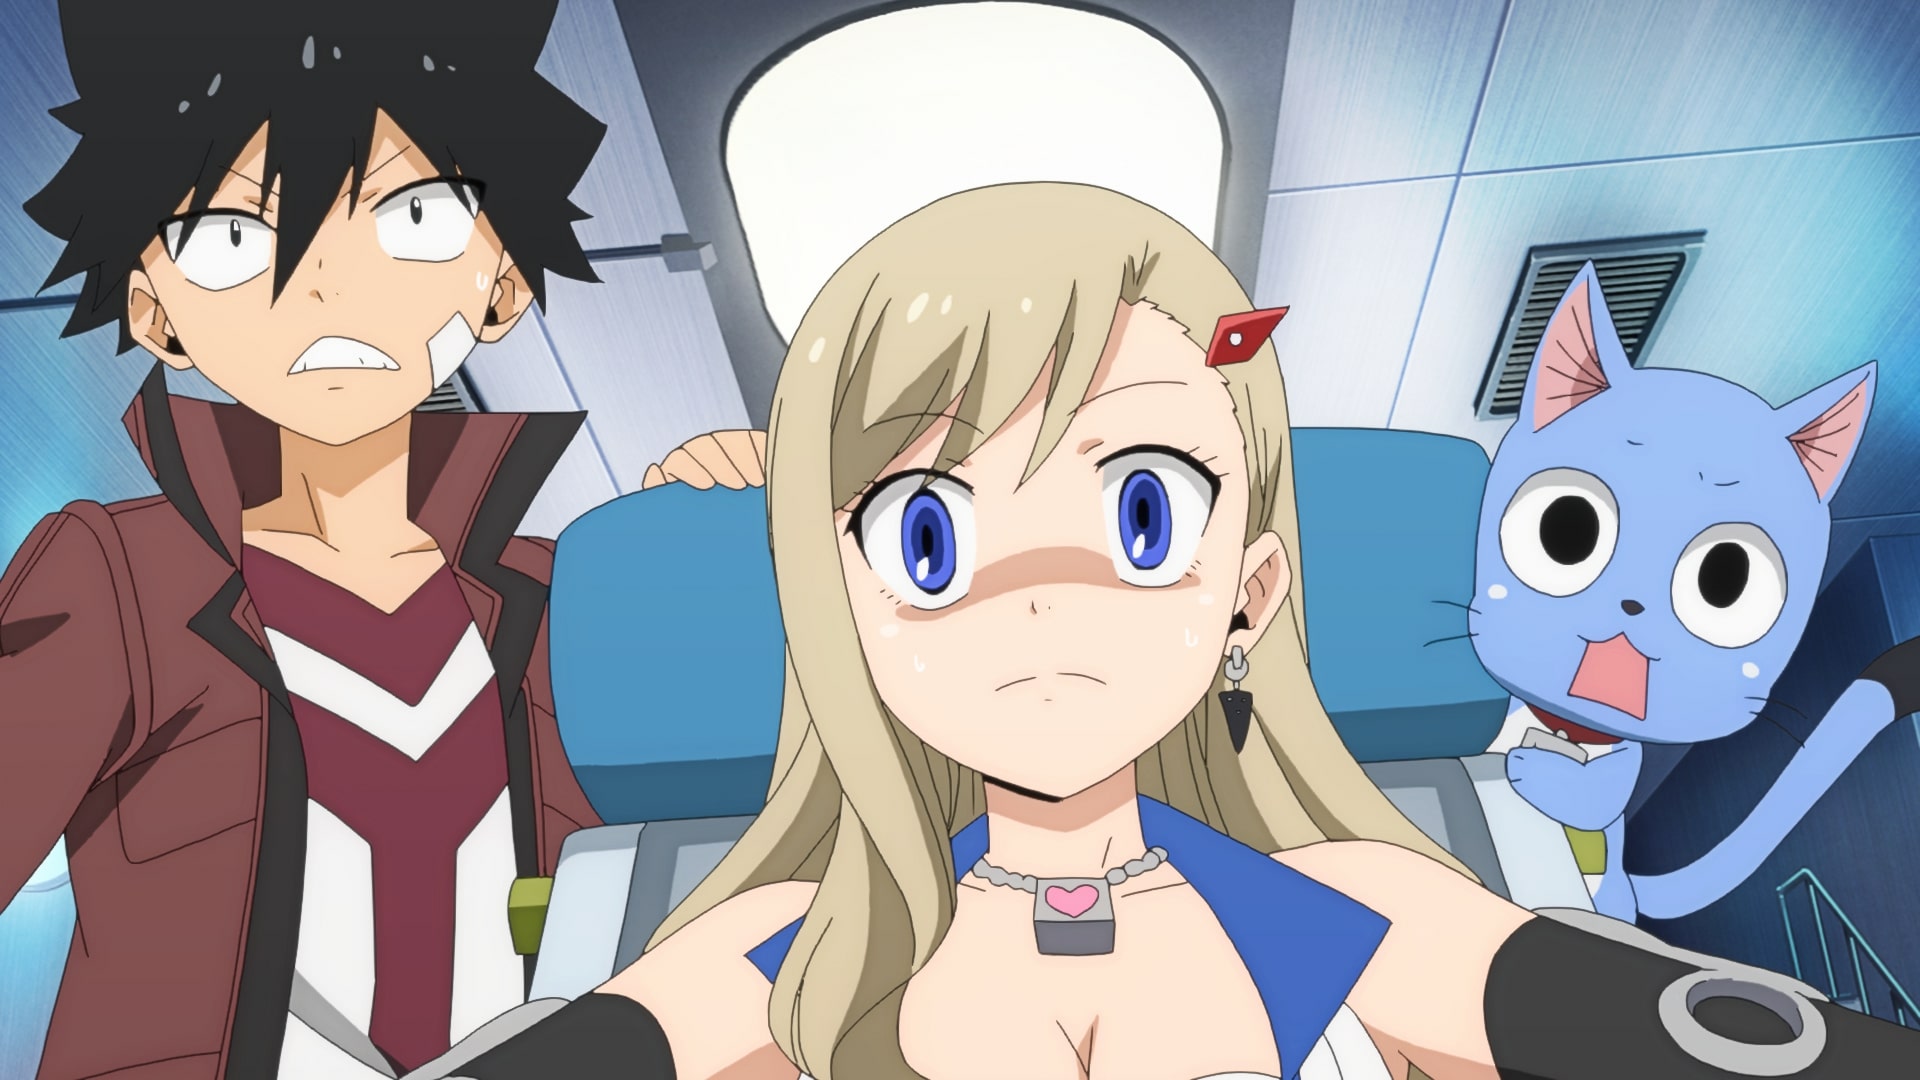 Edens Zero: When is Episode 19 Scheduled to Release, and Where Can Fans Watch the Series?